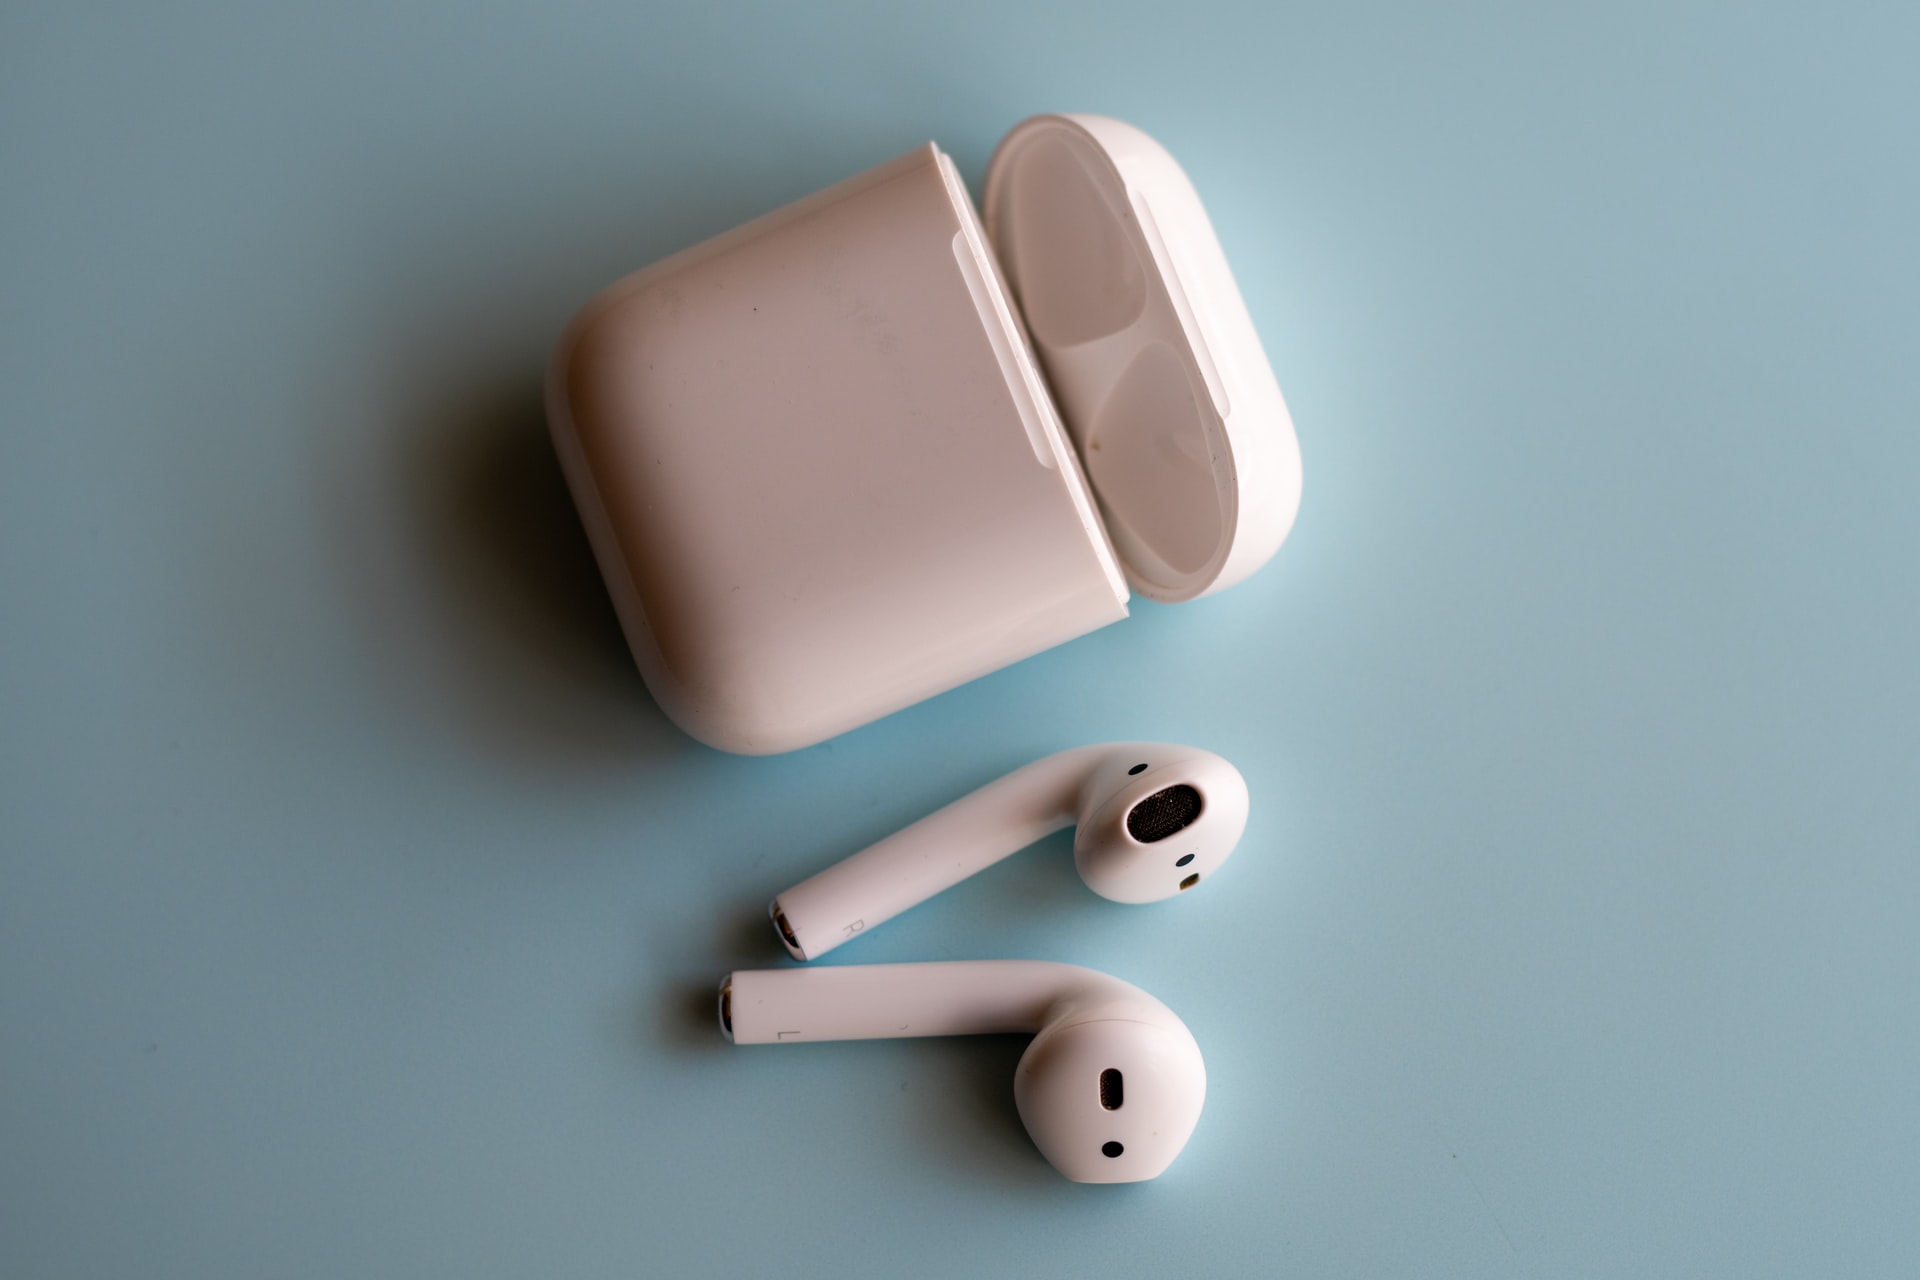 Do Apple AirPods Work with iPhone 6?